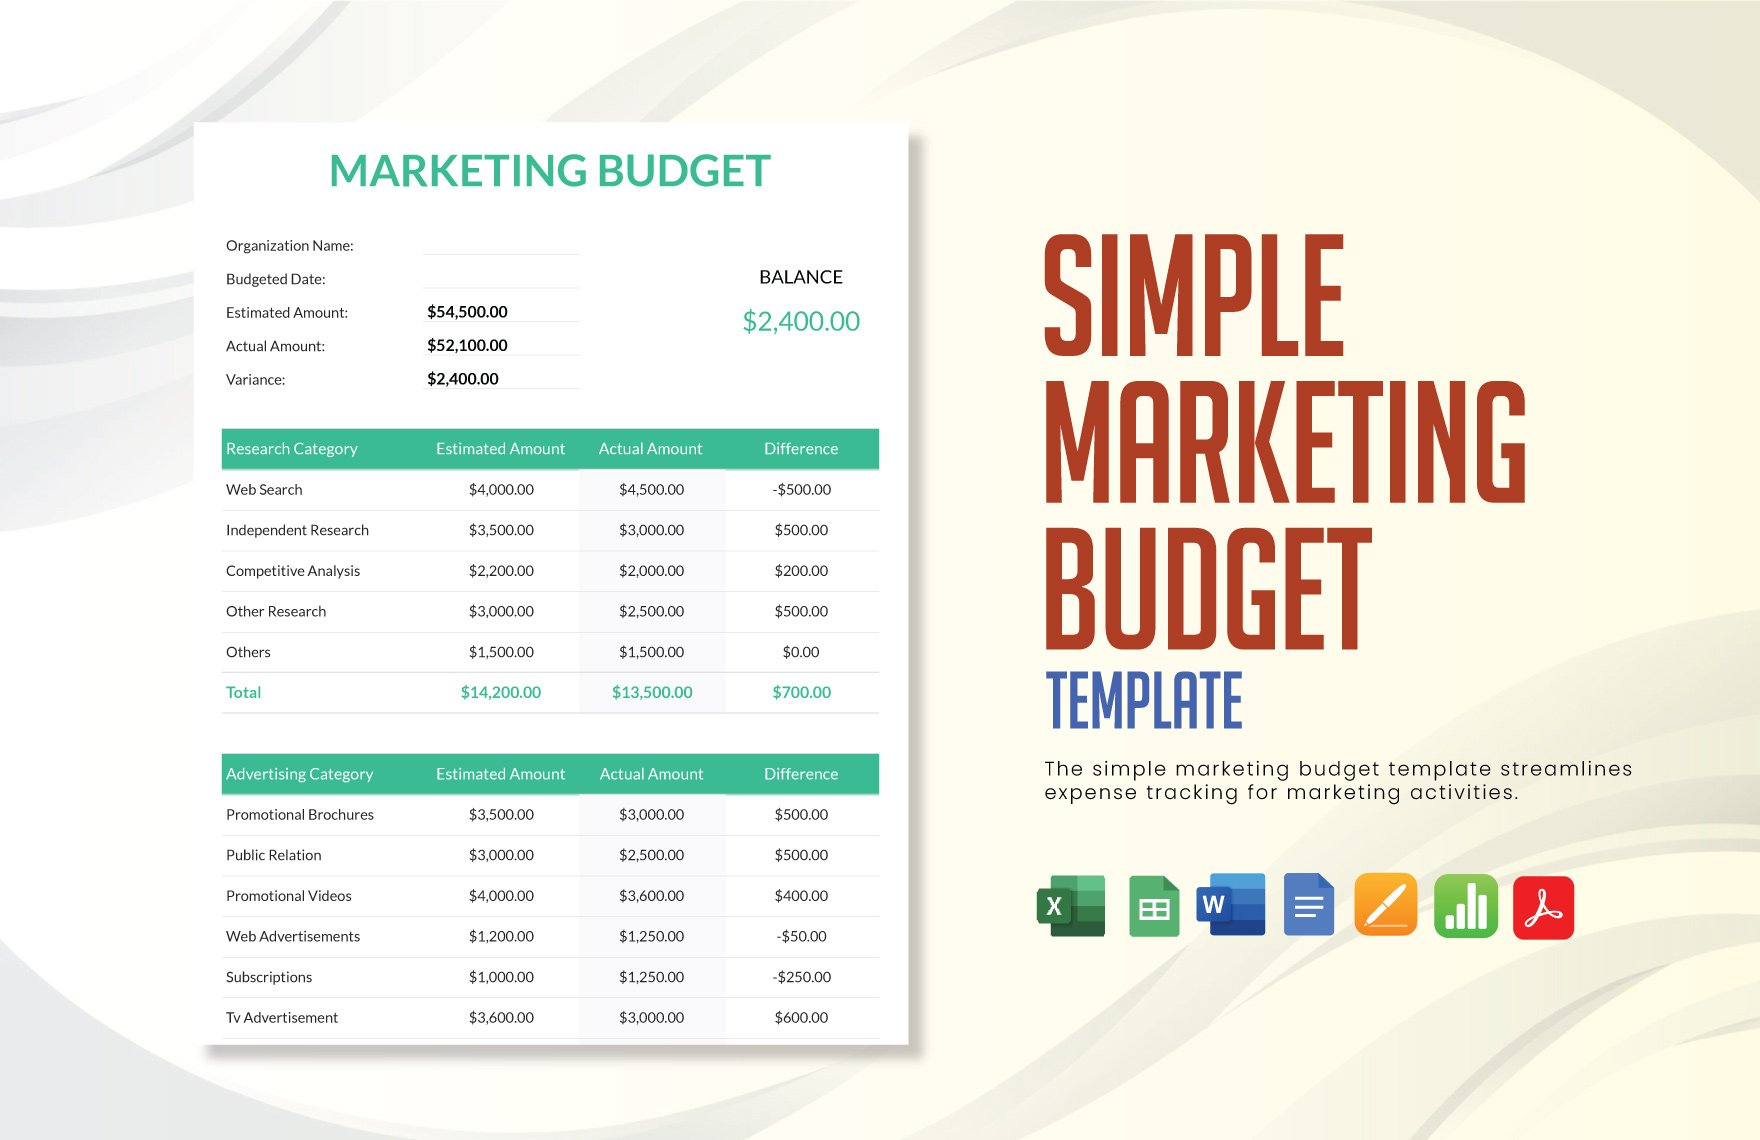 Simple Marketing Budget Template